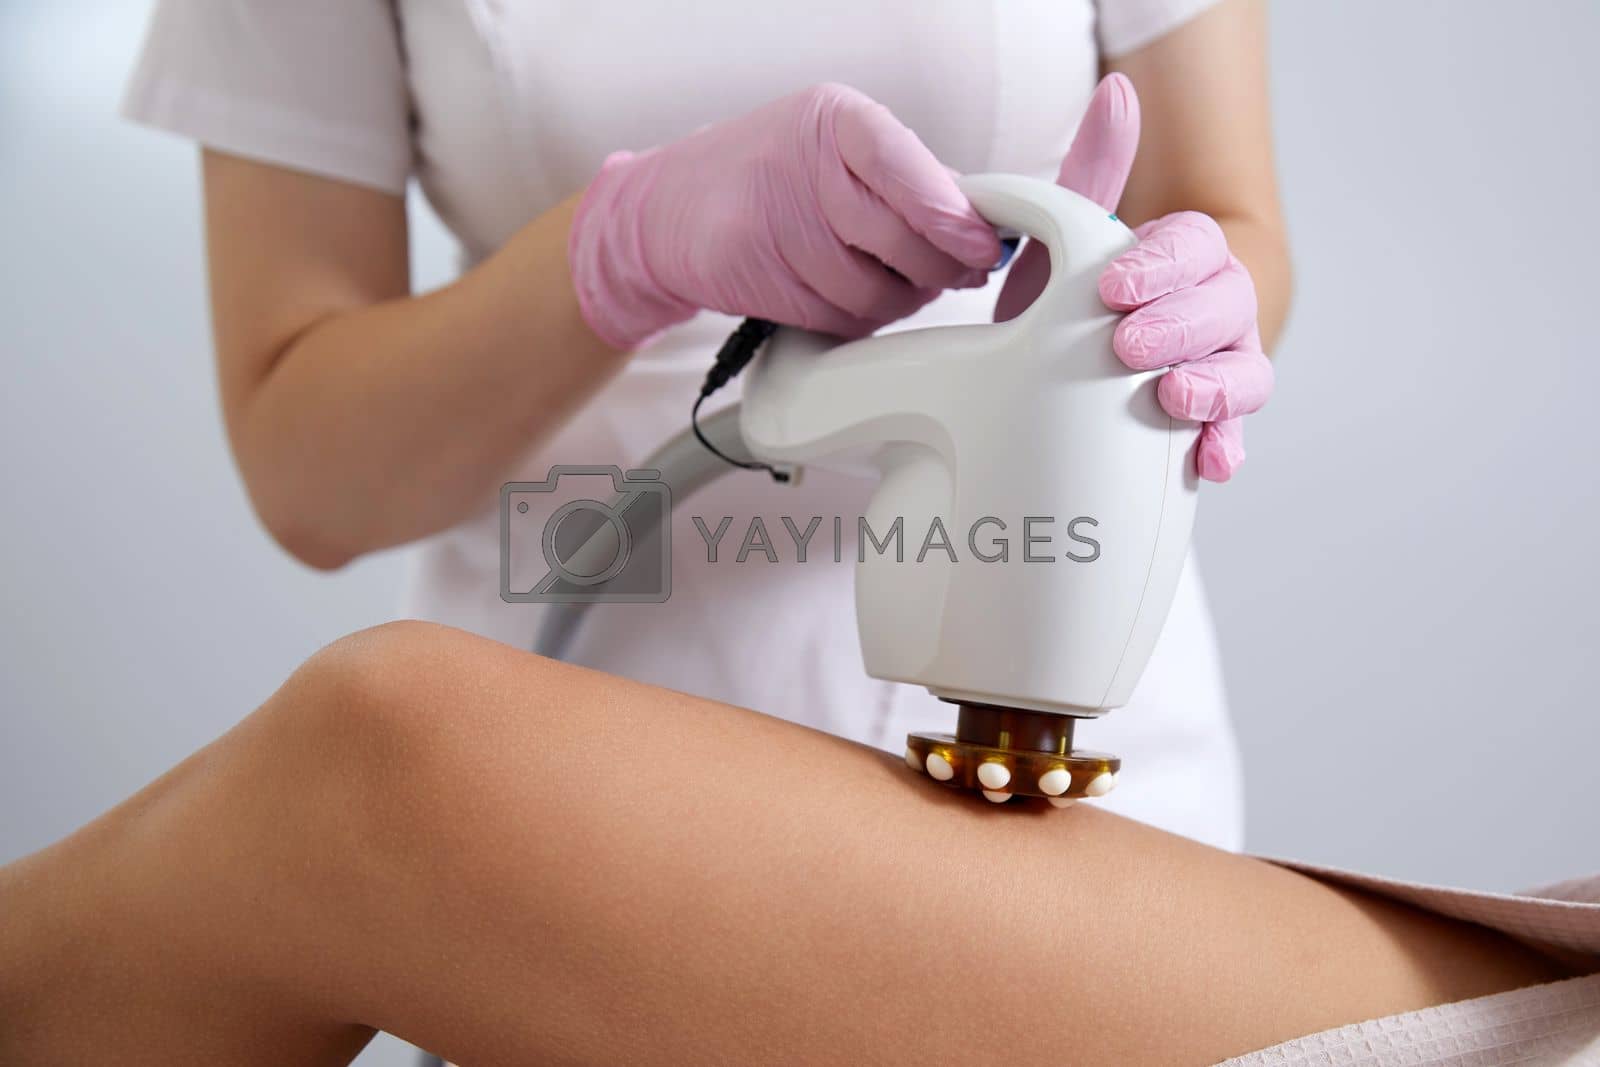 Royalty free image of Woman Having Laser Treatment On Thigh. Ultrasound cavitation body contouring treatment. Anti cellulite treatment by Mariakray